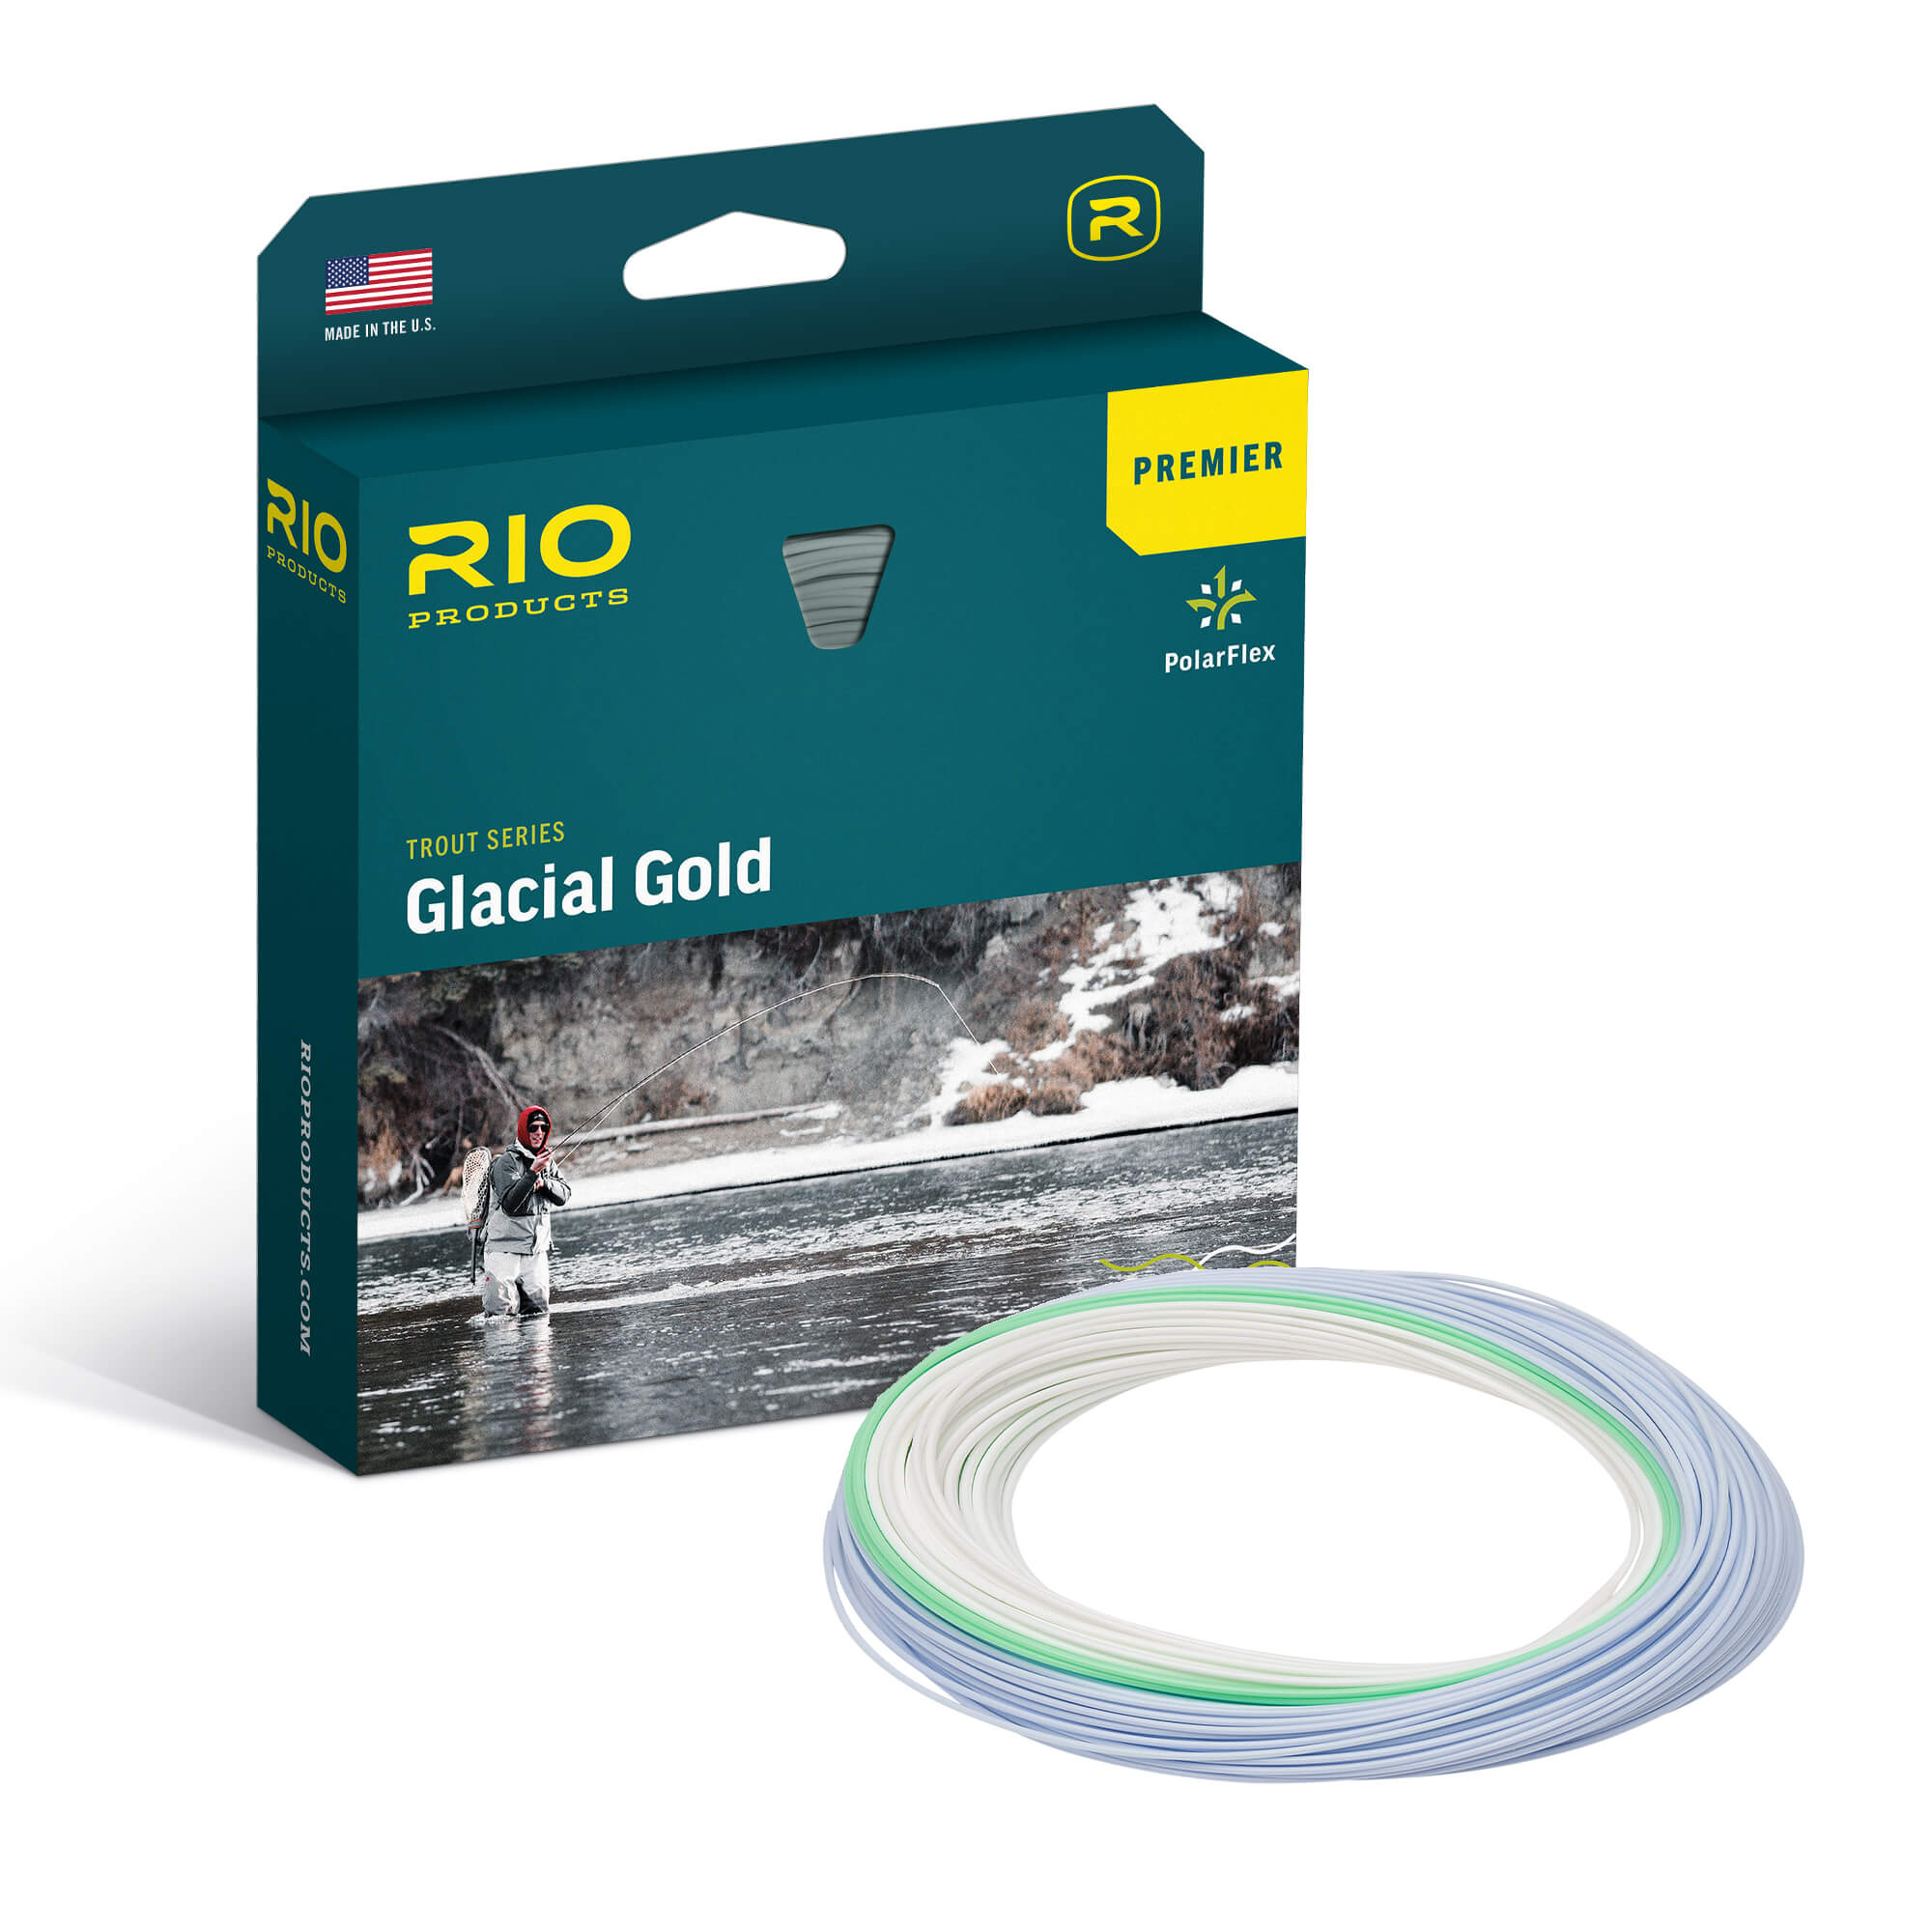 RIO PREMIER GLACIAL GOLD FLY LINE – Guide Flyfishing